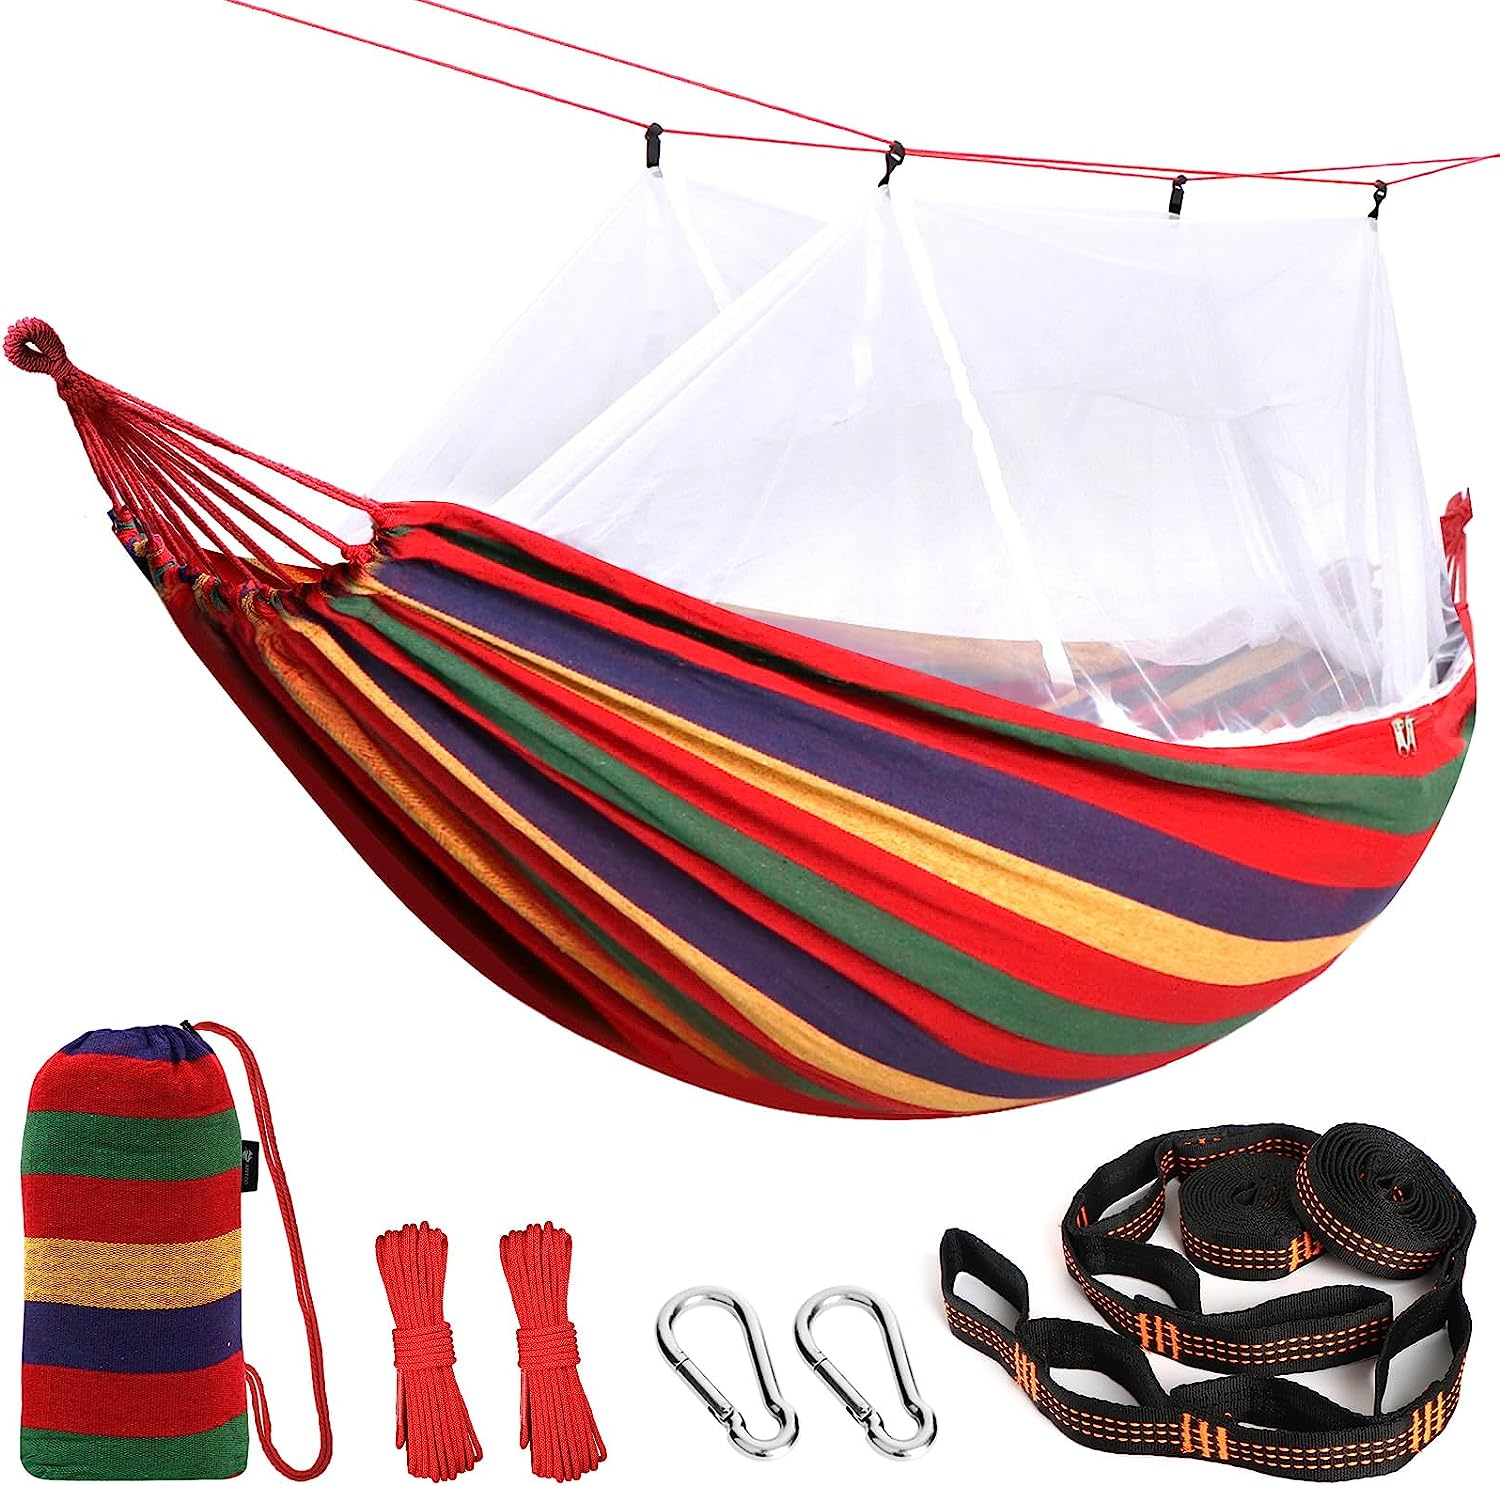 Anyoo Camping Cotton Hammock with Mosquito Fabric [...]